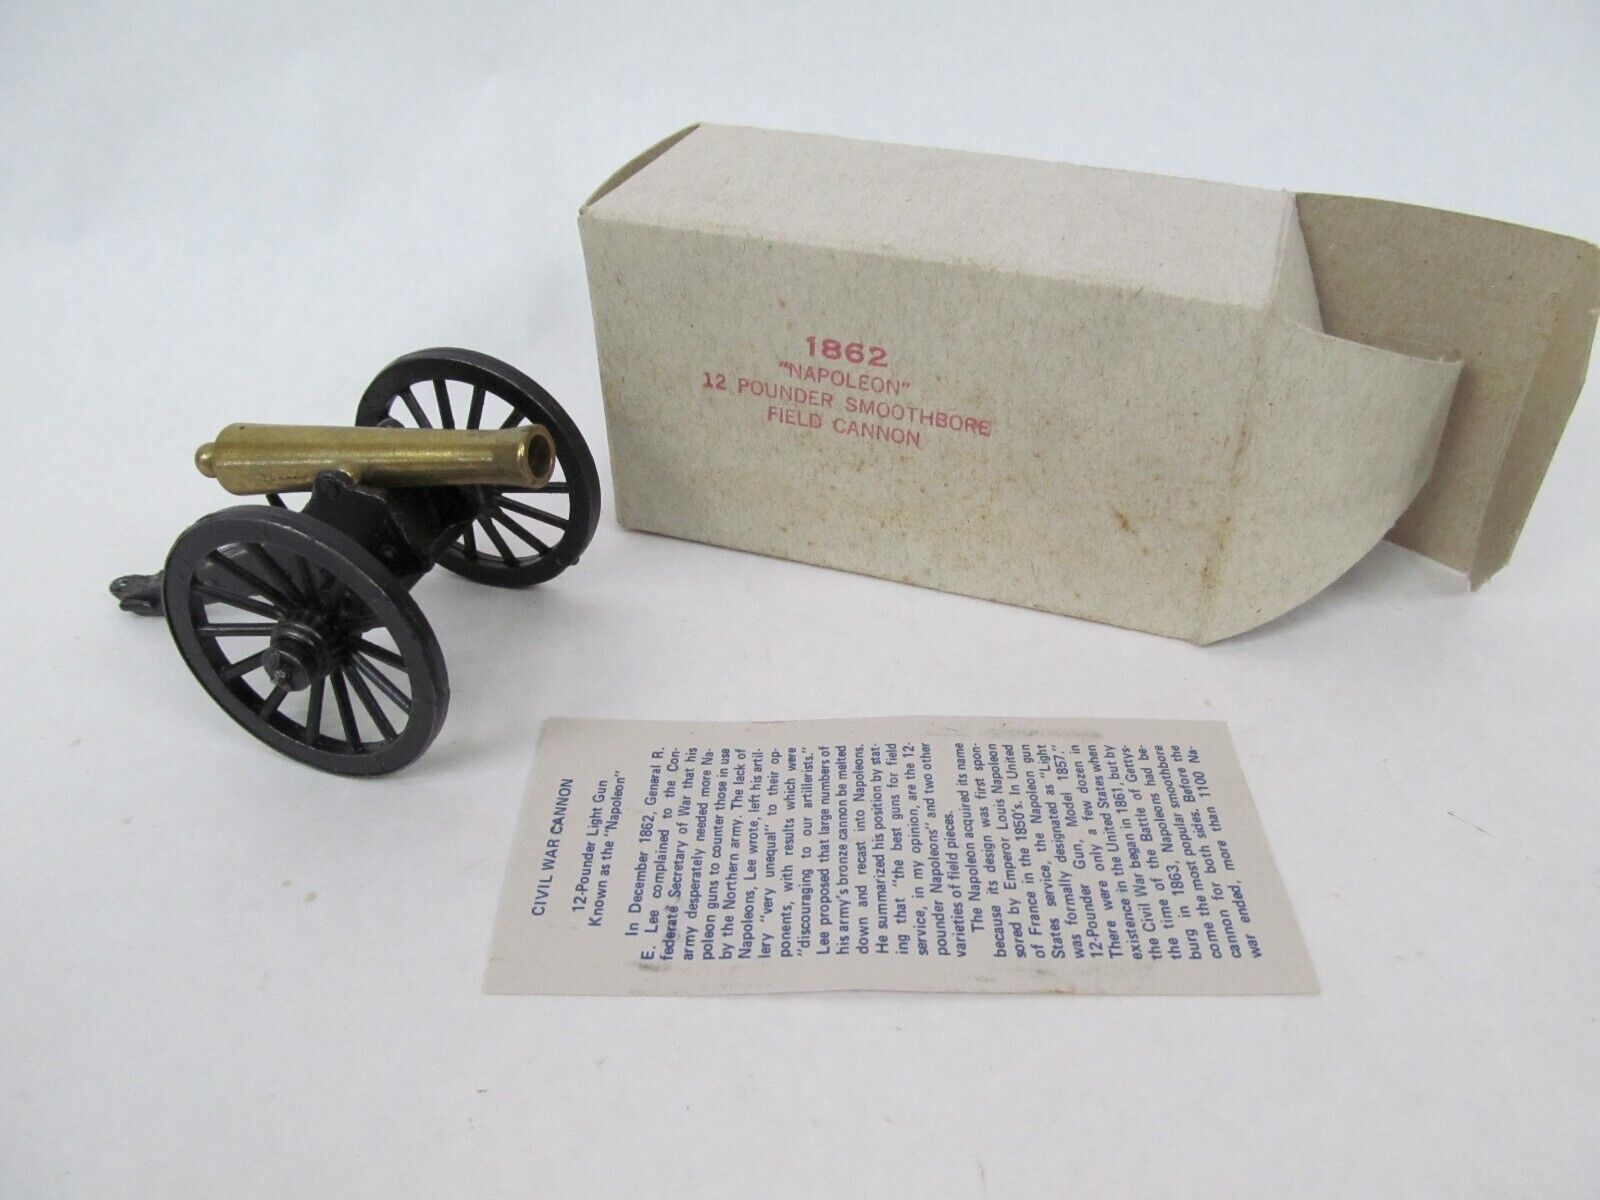 1862 Napoleon 12 Pounder Smooth Bore Field Cannon Model Toy Penncraft